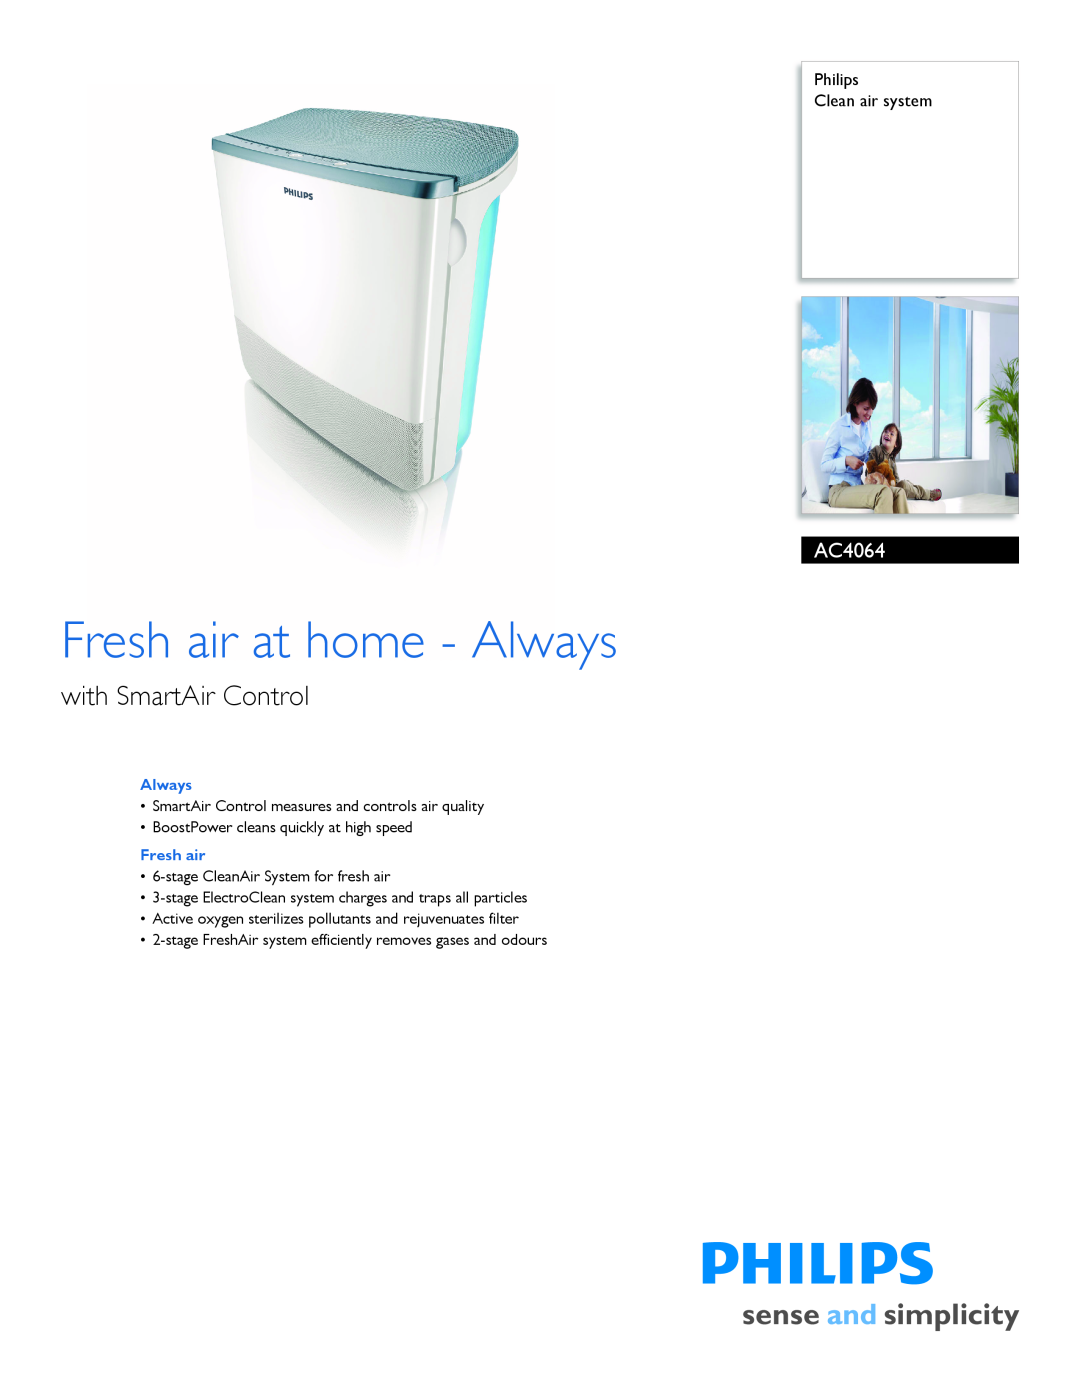 Philips AC4064/00 manual Philips Clean air system, Fresh air at home - Always, with SmartAir Control 